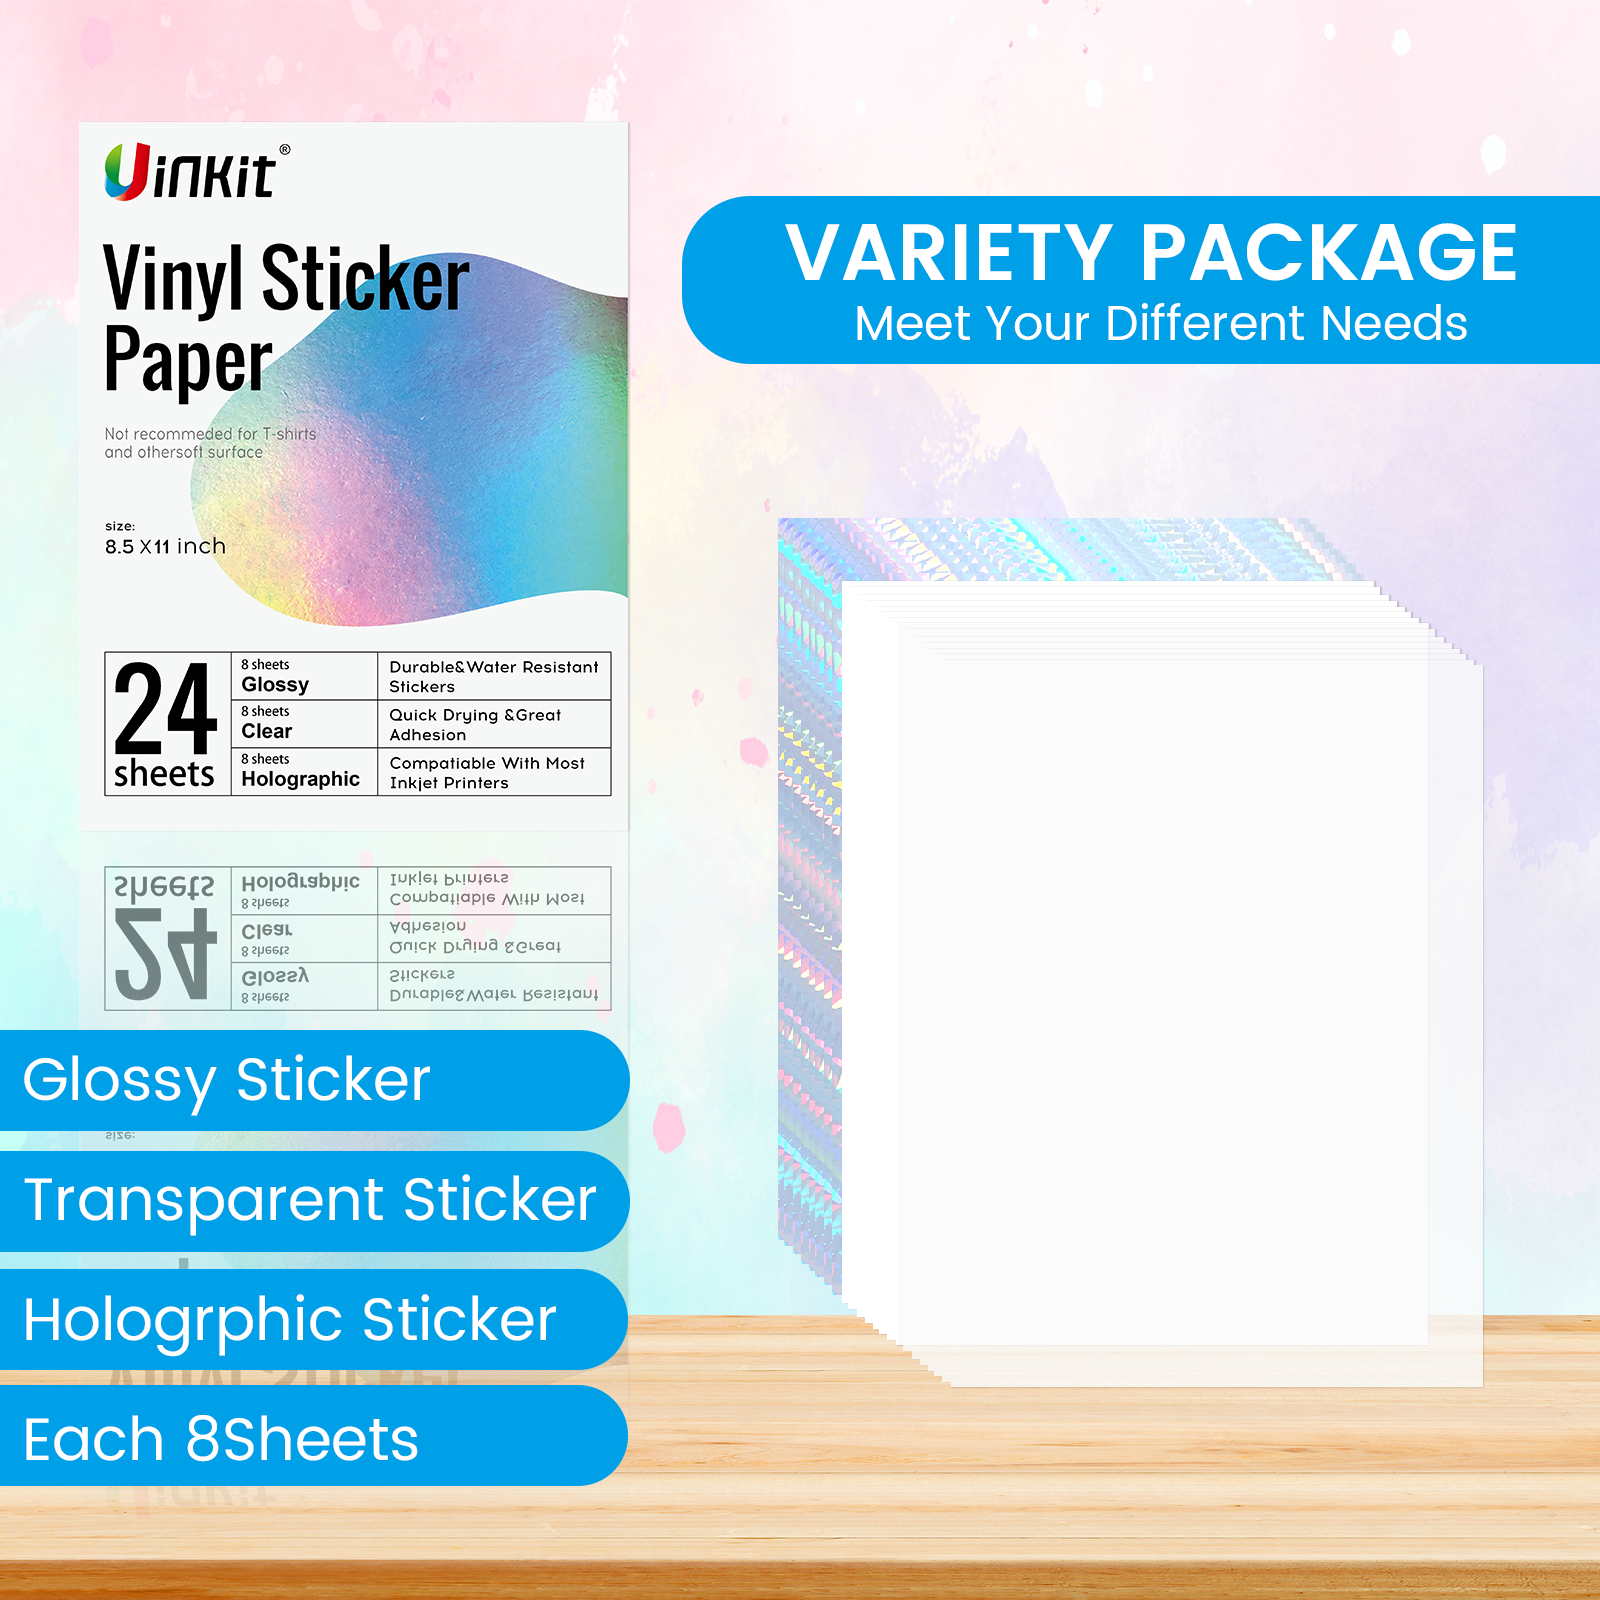 Holographic Vinyl Sticker Paper 20 Sheets 8.5 x 11 Waterproof Printable Paper for Inkjet & Laser Printer, Dries Quickly, Self Adhesive, Cut with